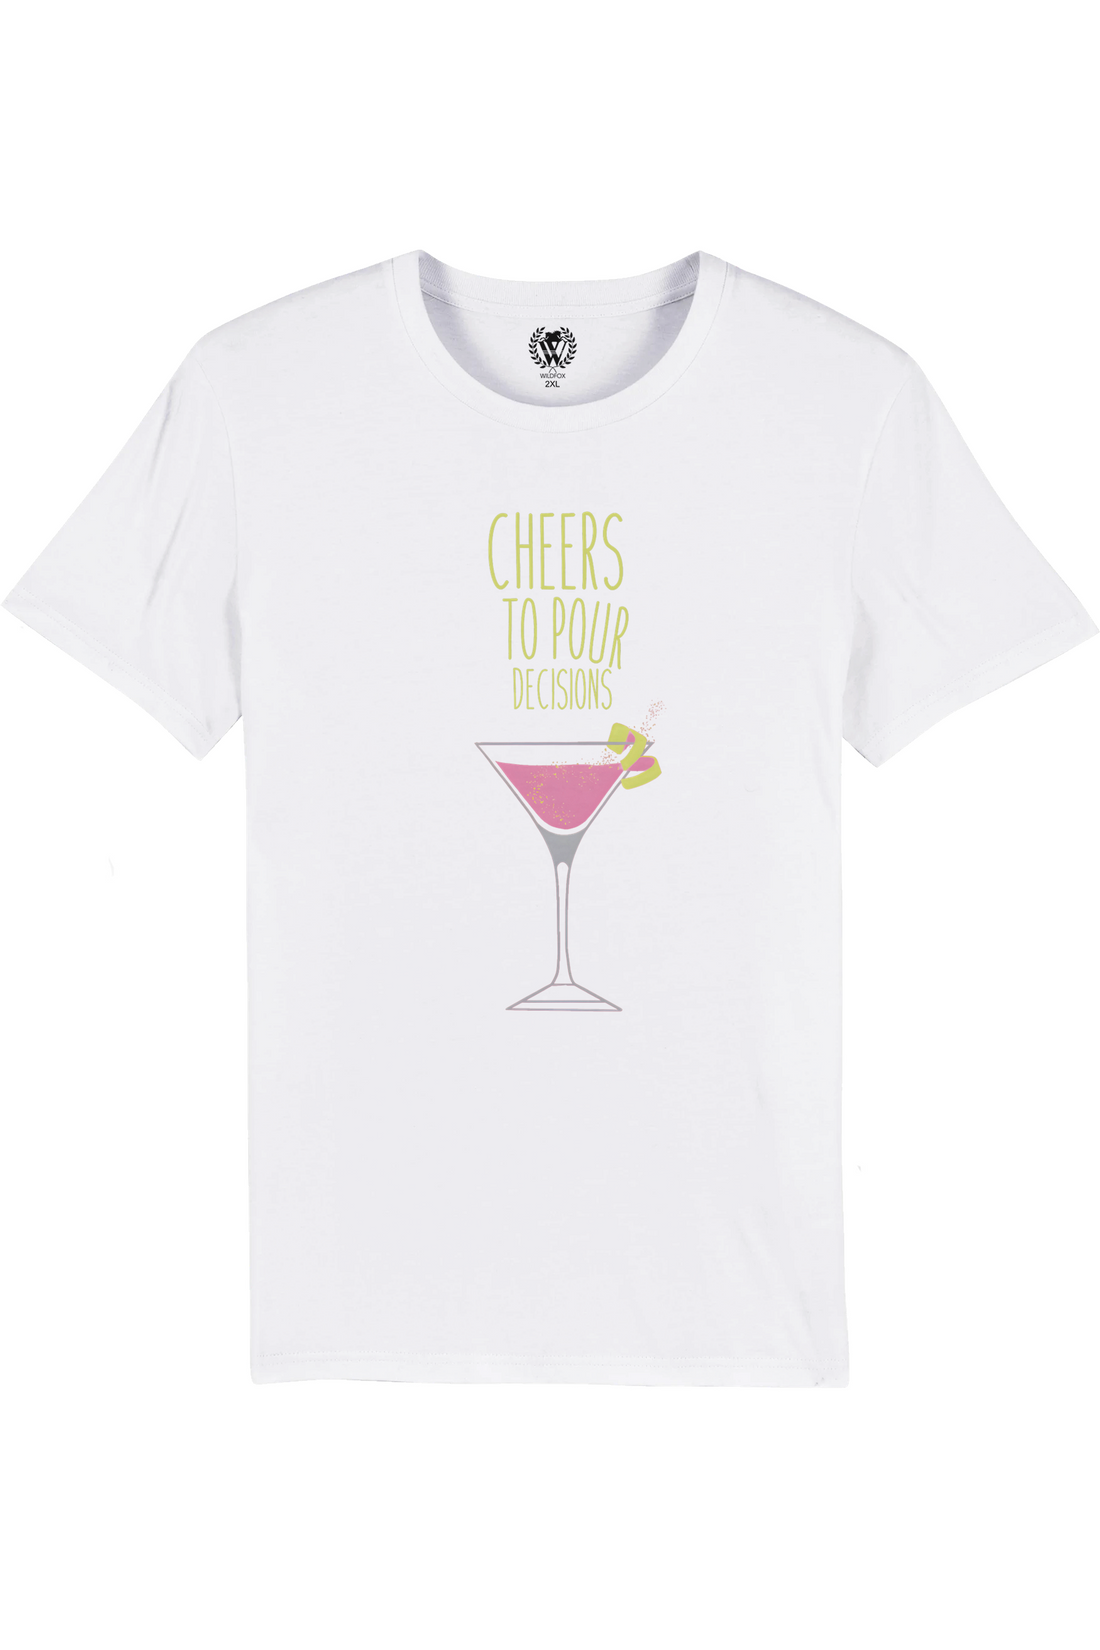 Cheers to Pour Decisions  | Organic White